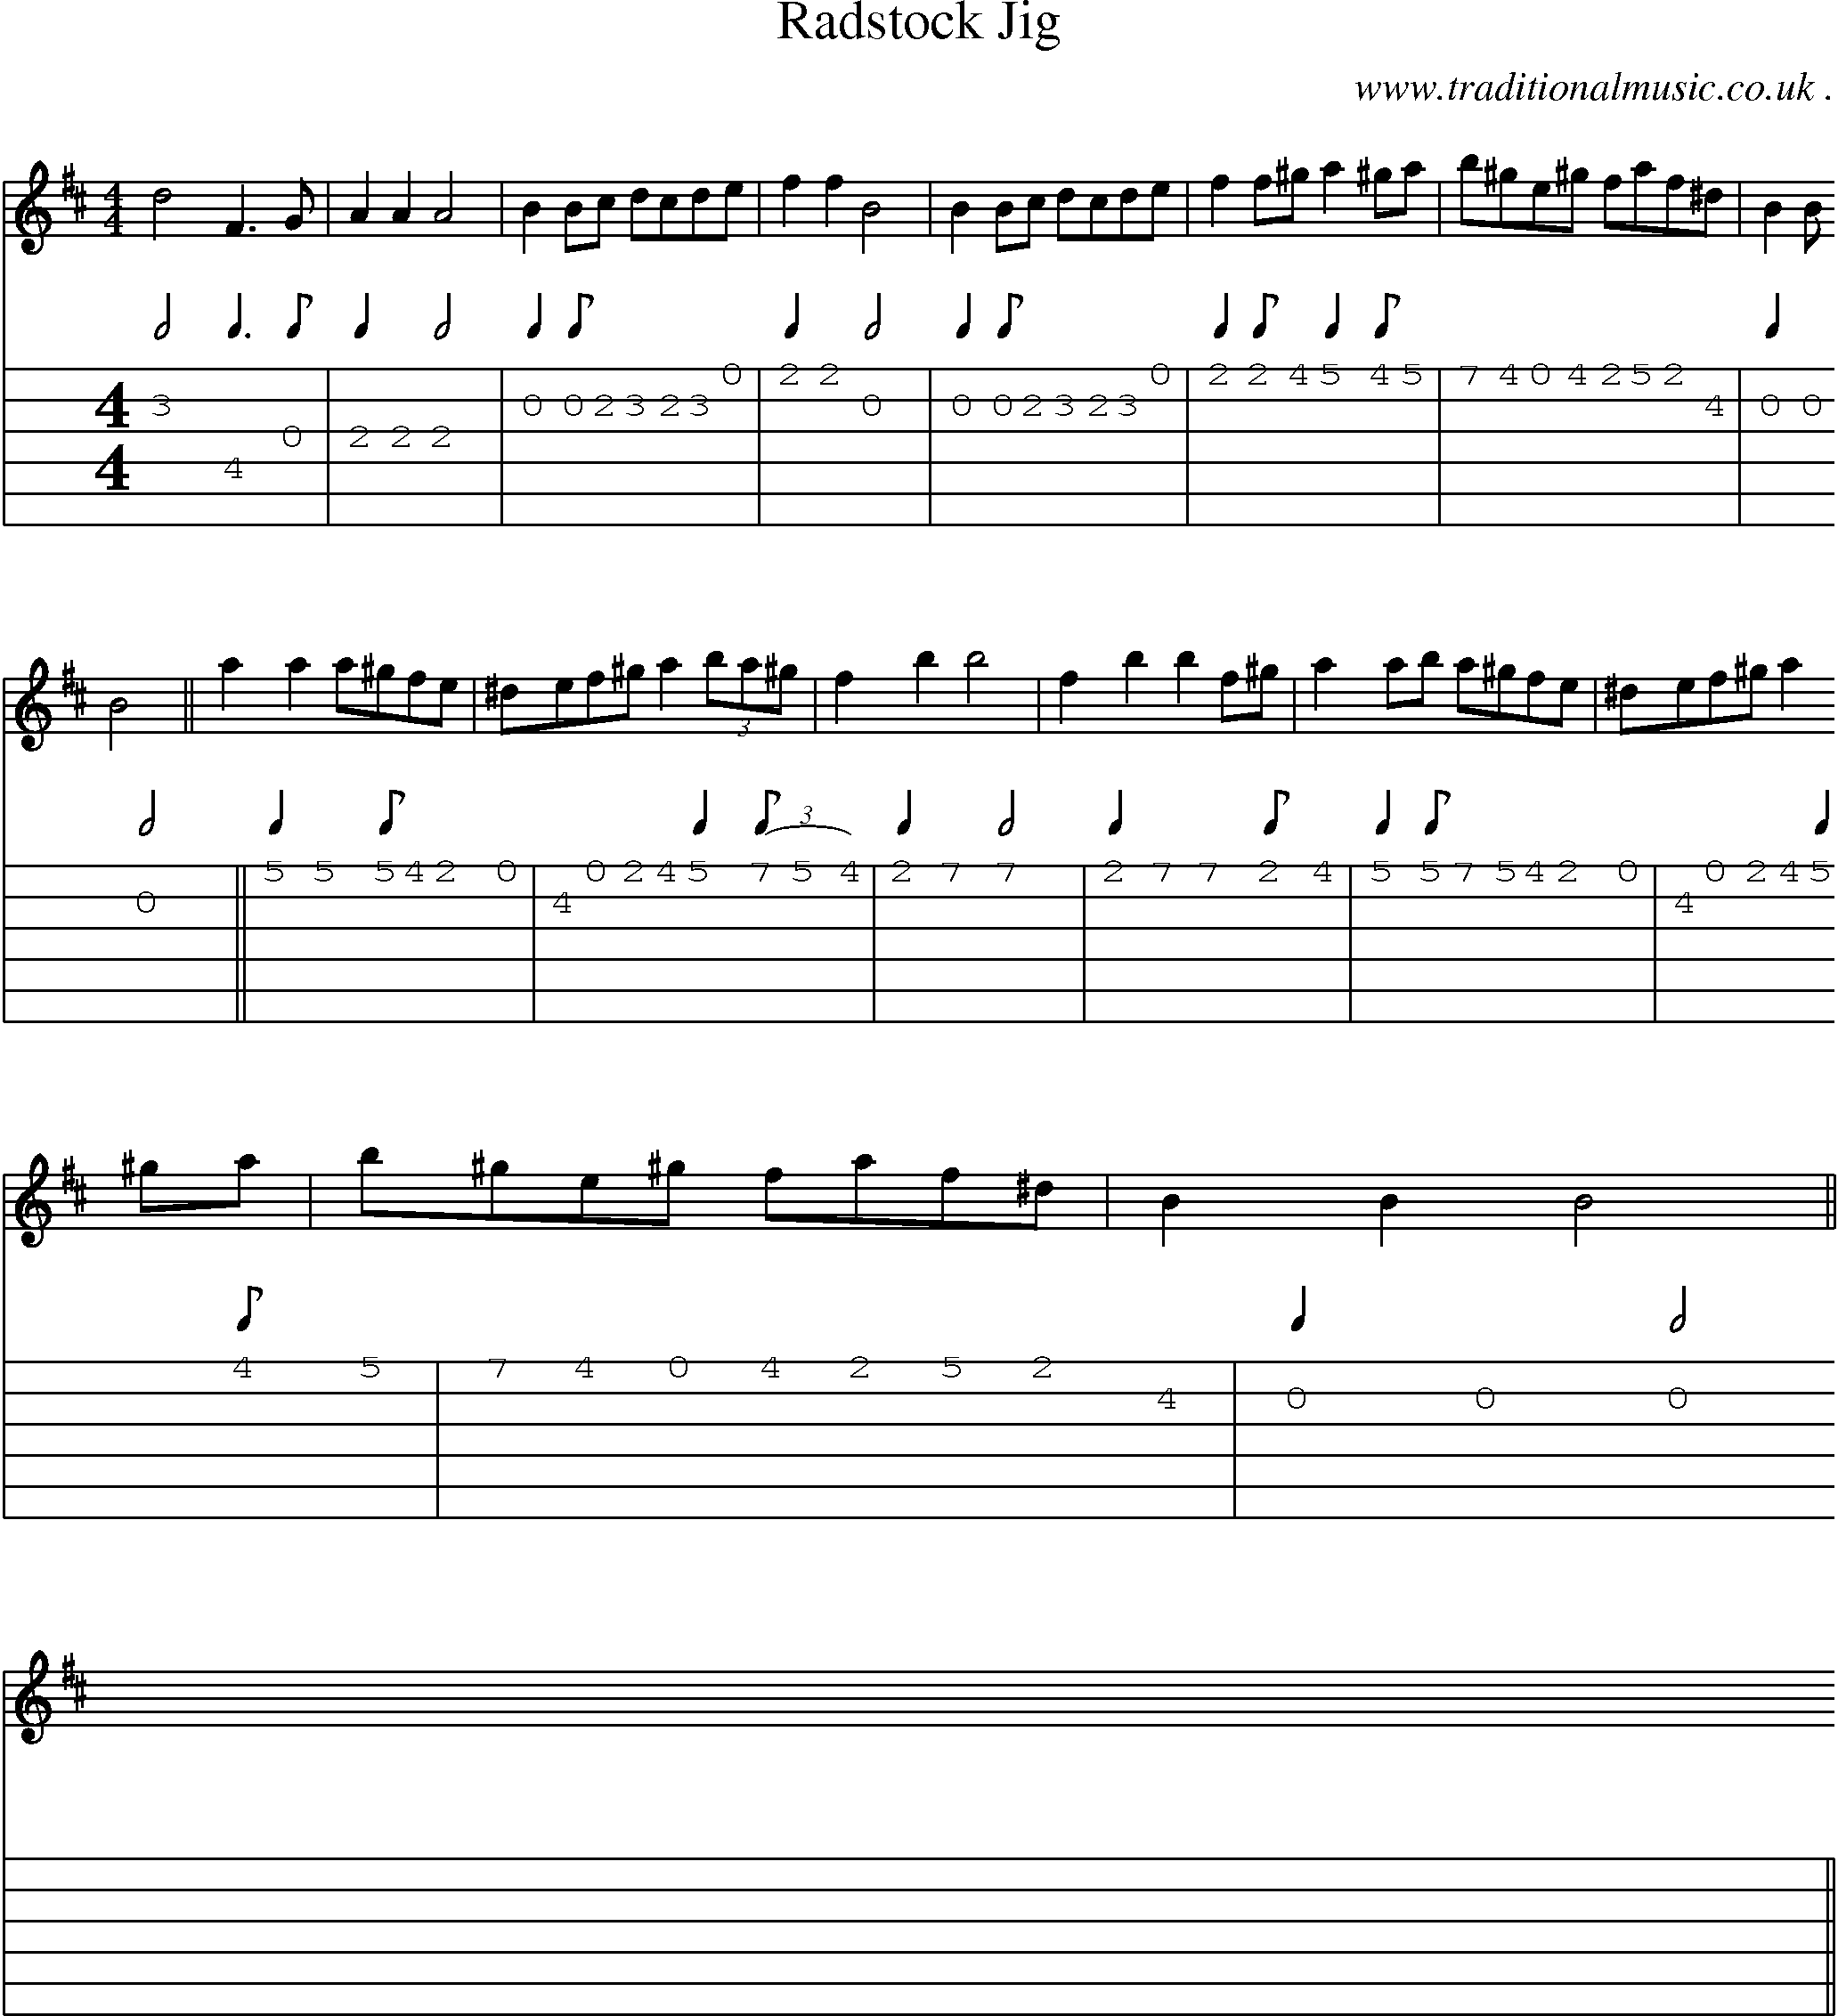 Sheet-Music and Guitar Tabs for Radstock Jig